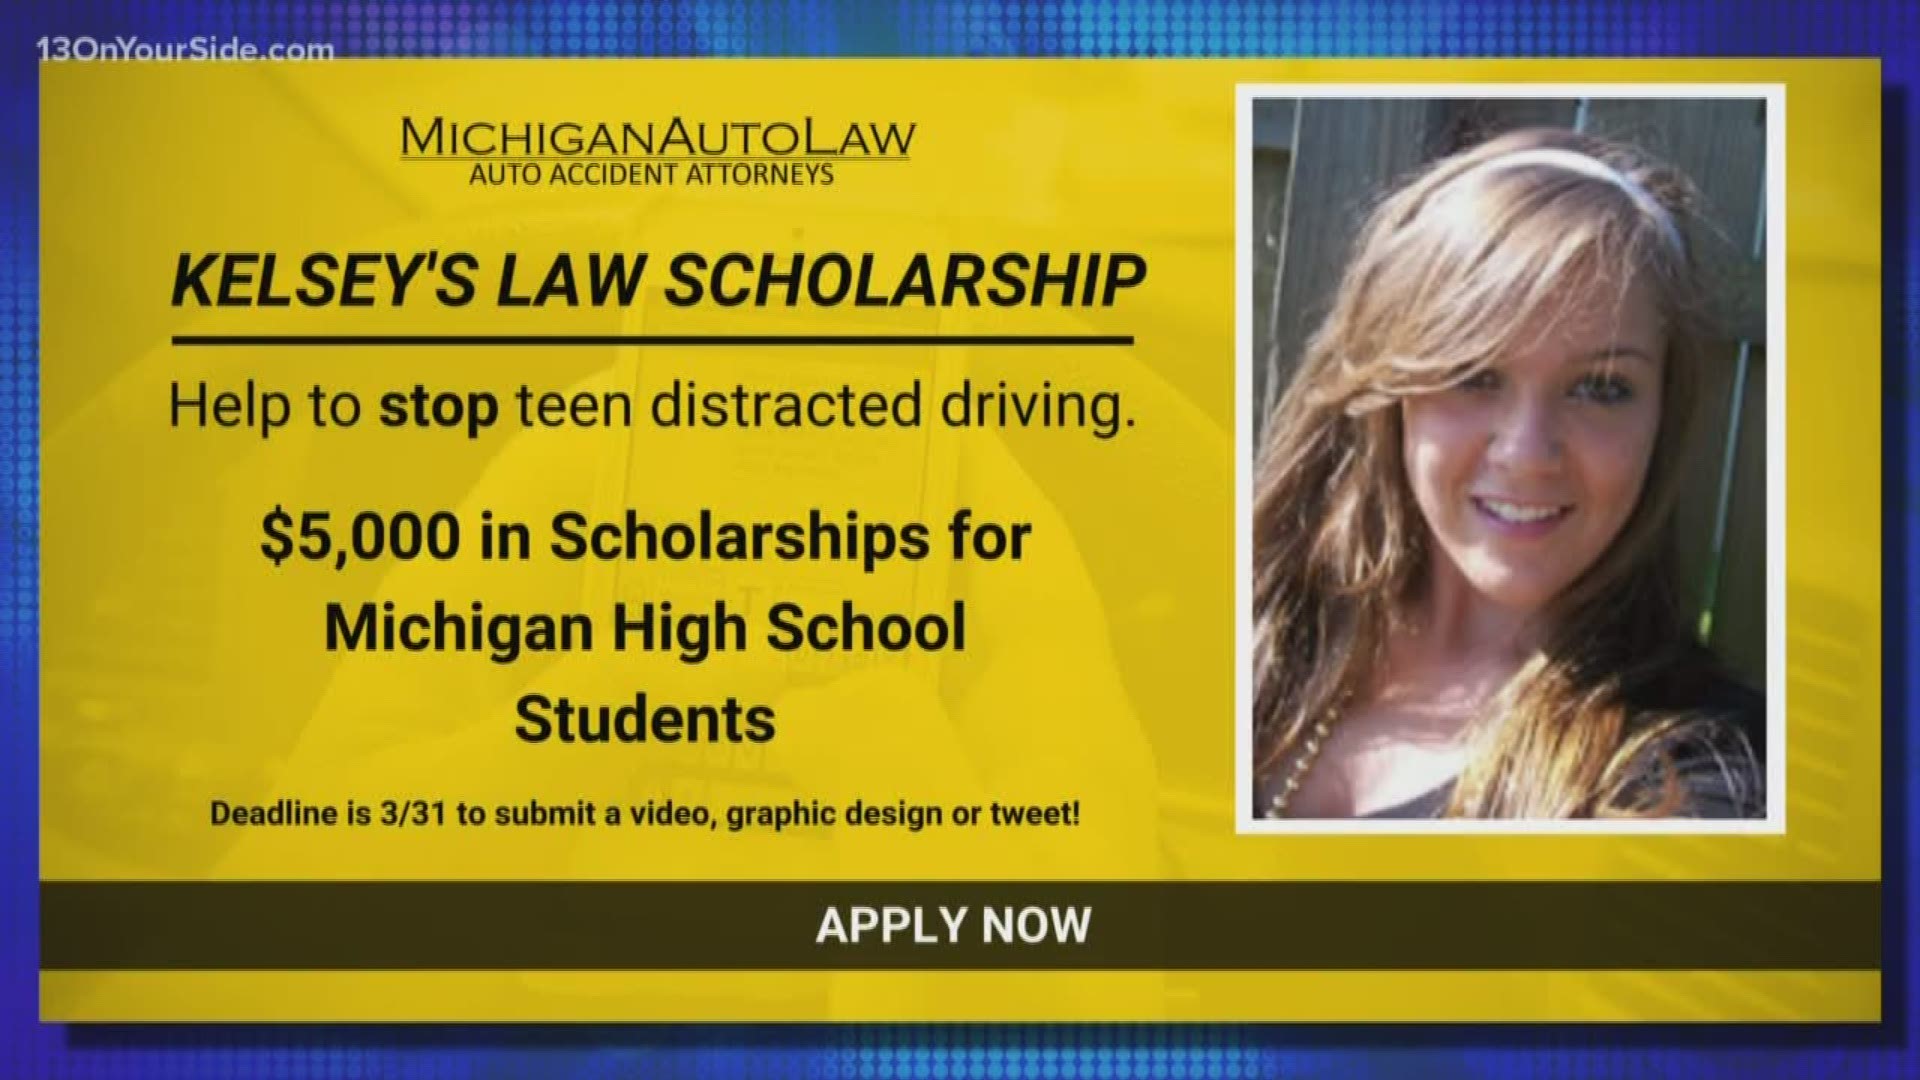 In April, $5,000 worth of scholarships will be awarded to Michigan students who submit the most persuasive message to reduce distractions while driving.